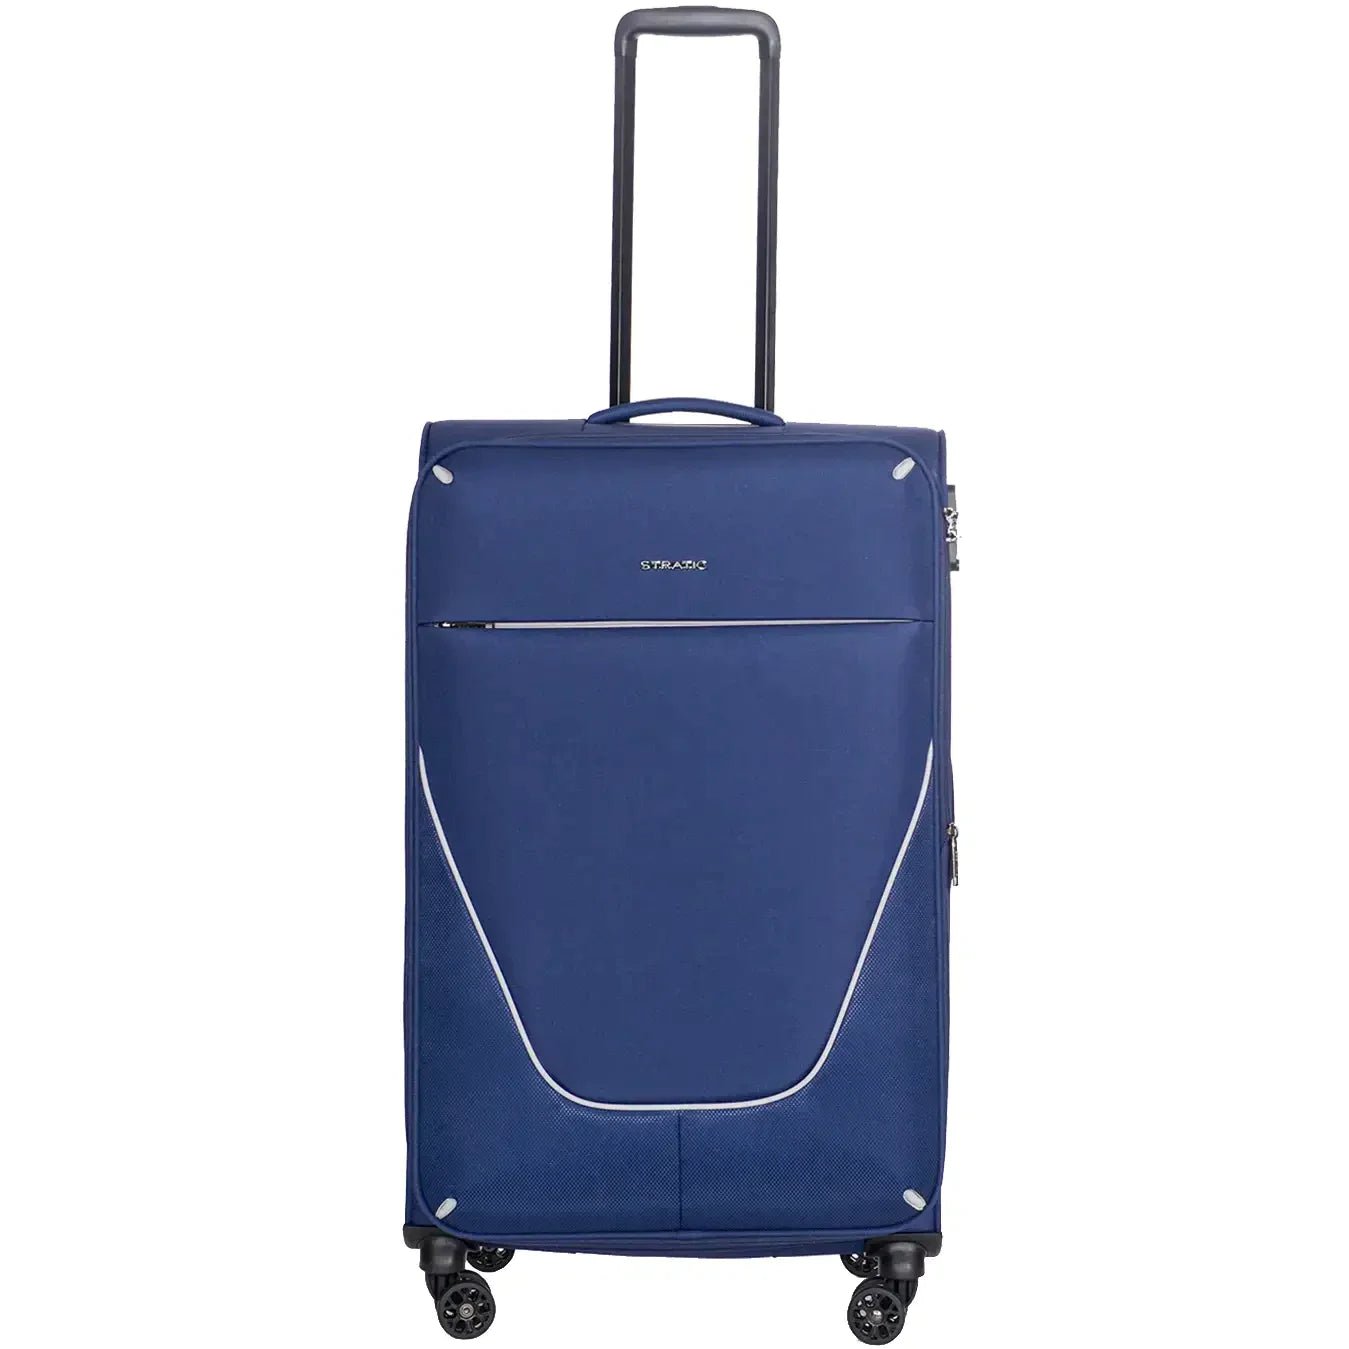 Stratic Strong 4-wheel trolley 78 cm - navy